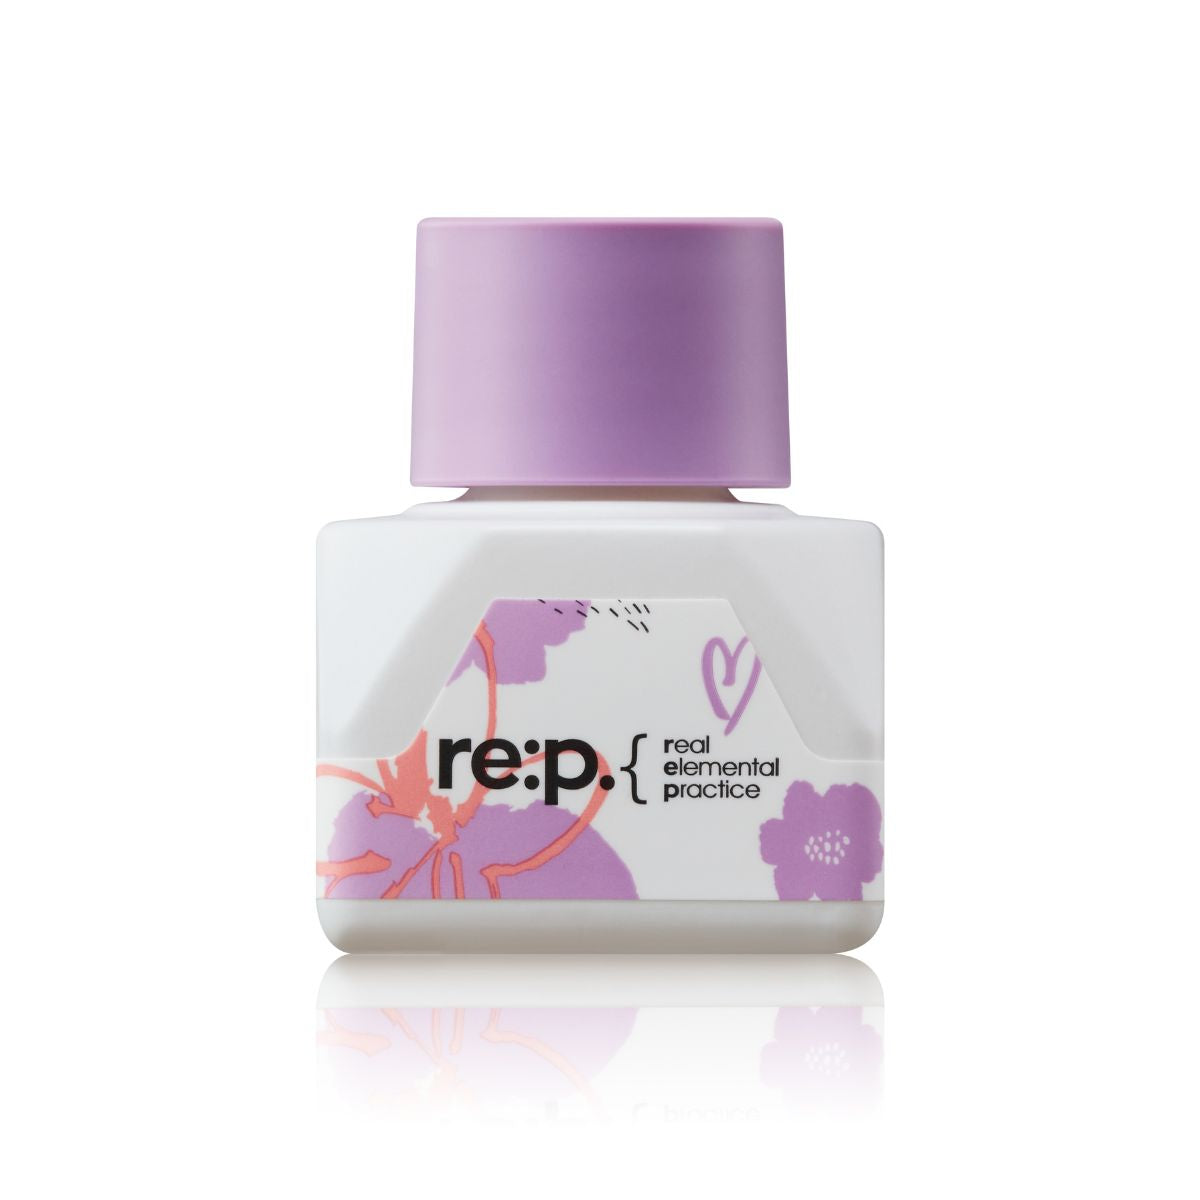 RE:P NATURAL HERB INNER BALANCE COZY 5ml - skin care